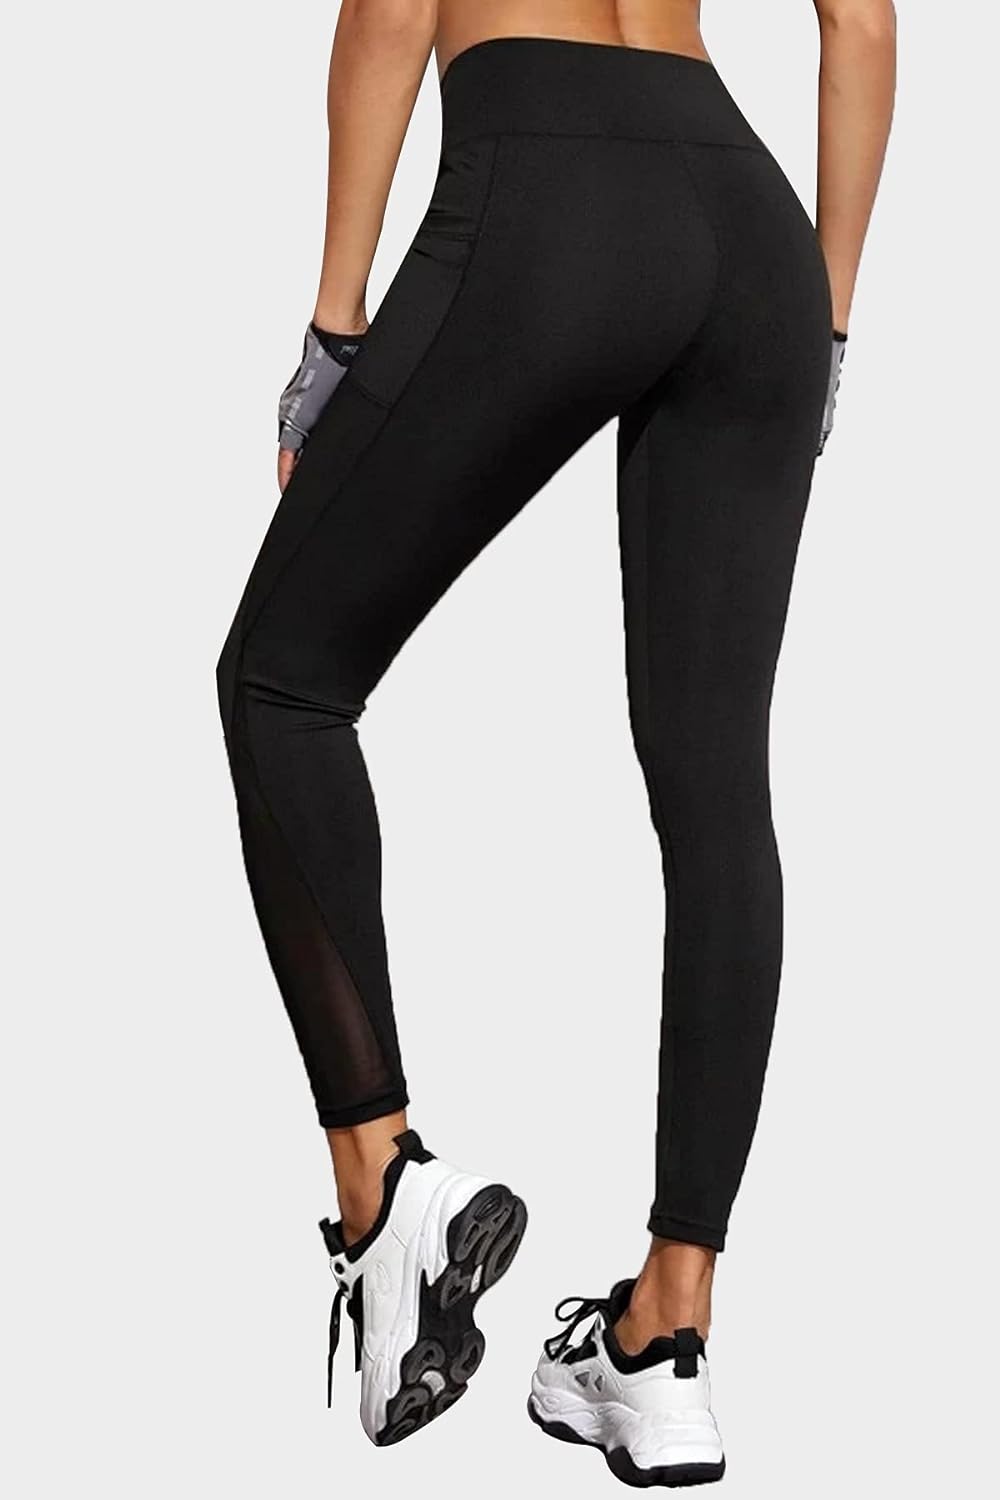 Gym wear Mesh Leggings Workout Pants with Side Pockets/Stretchable Tights/Highwaist Sports Fitness Yoga Track Pants